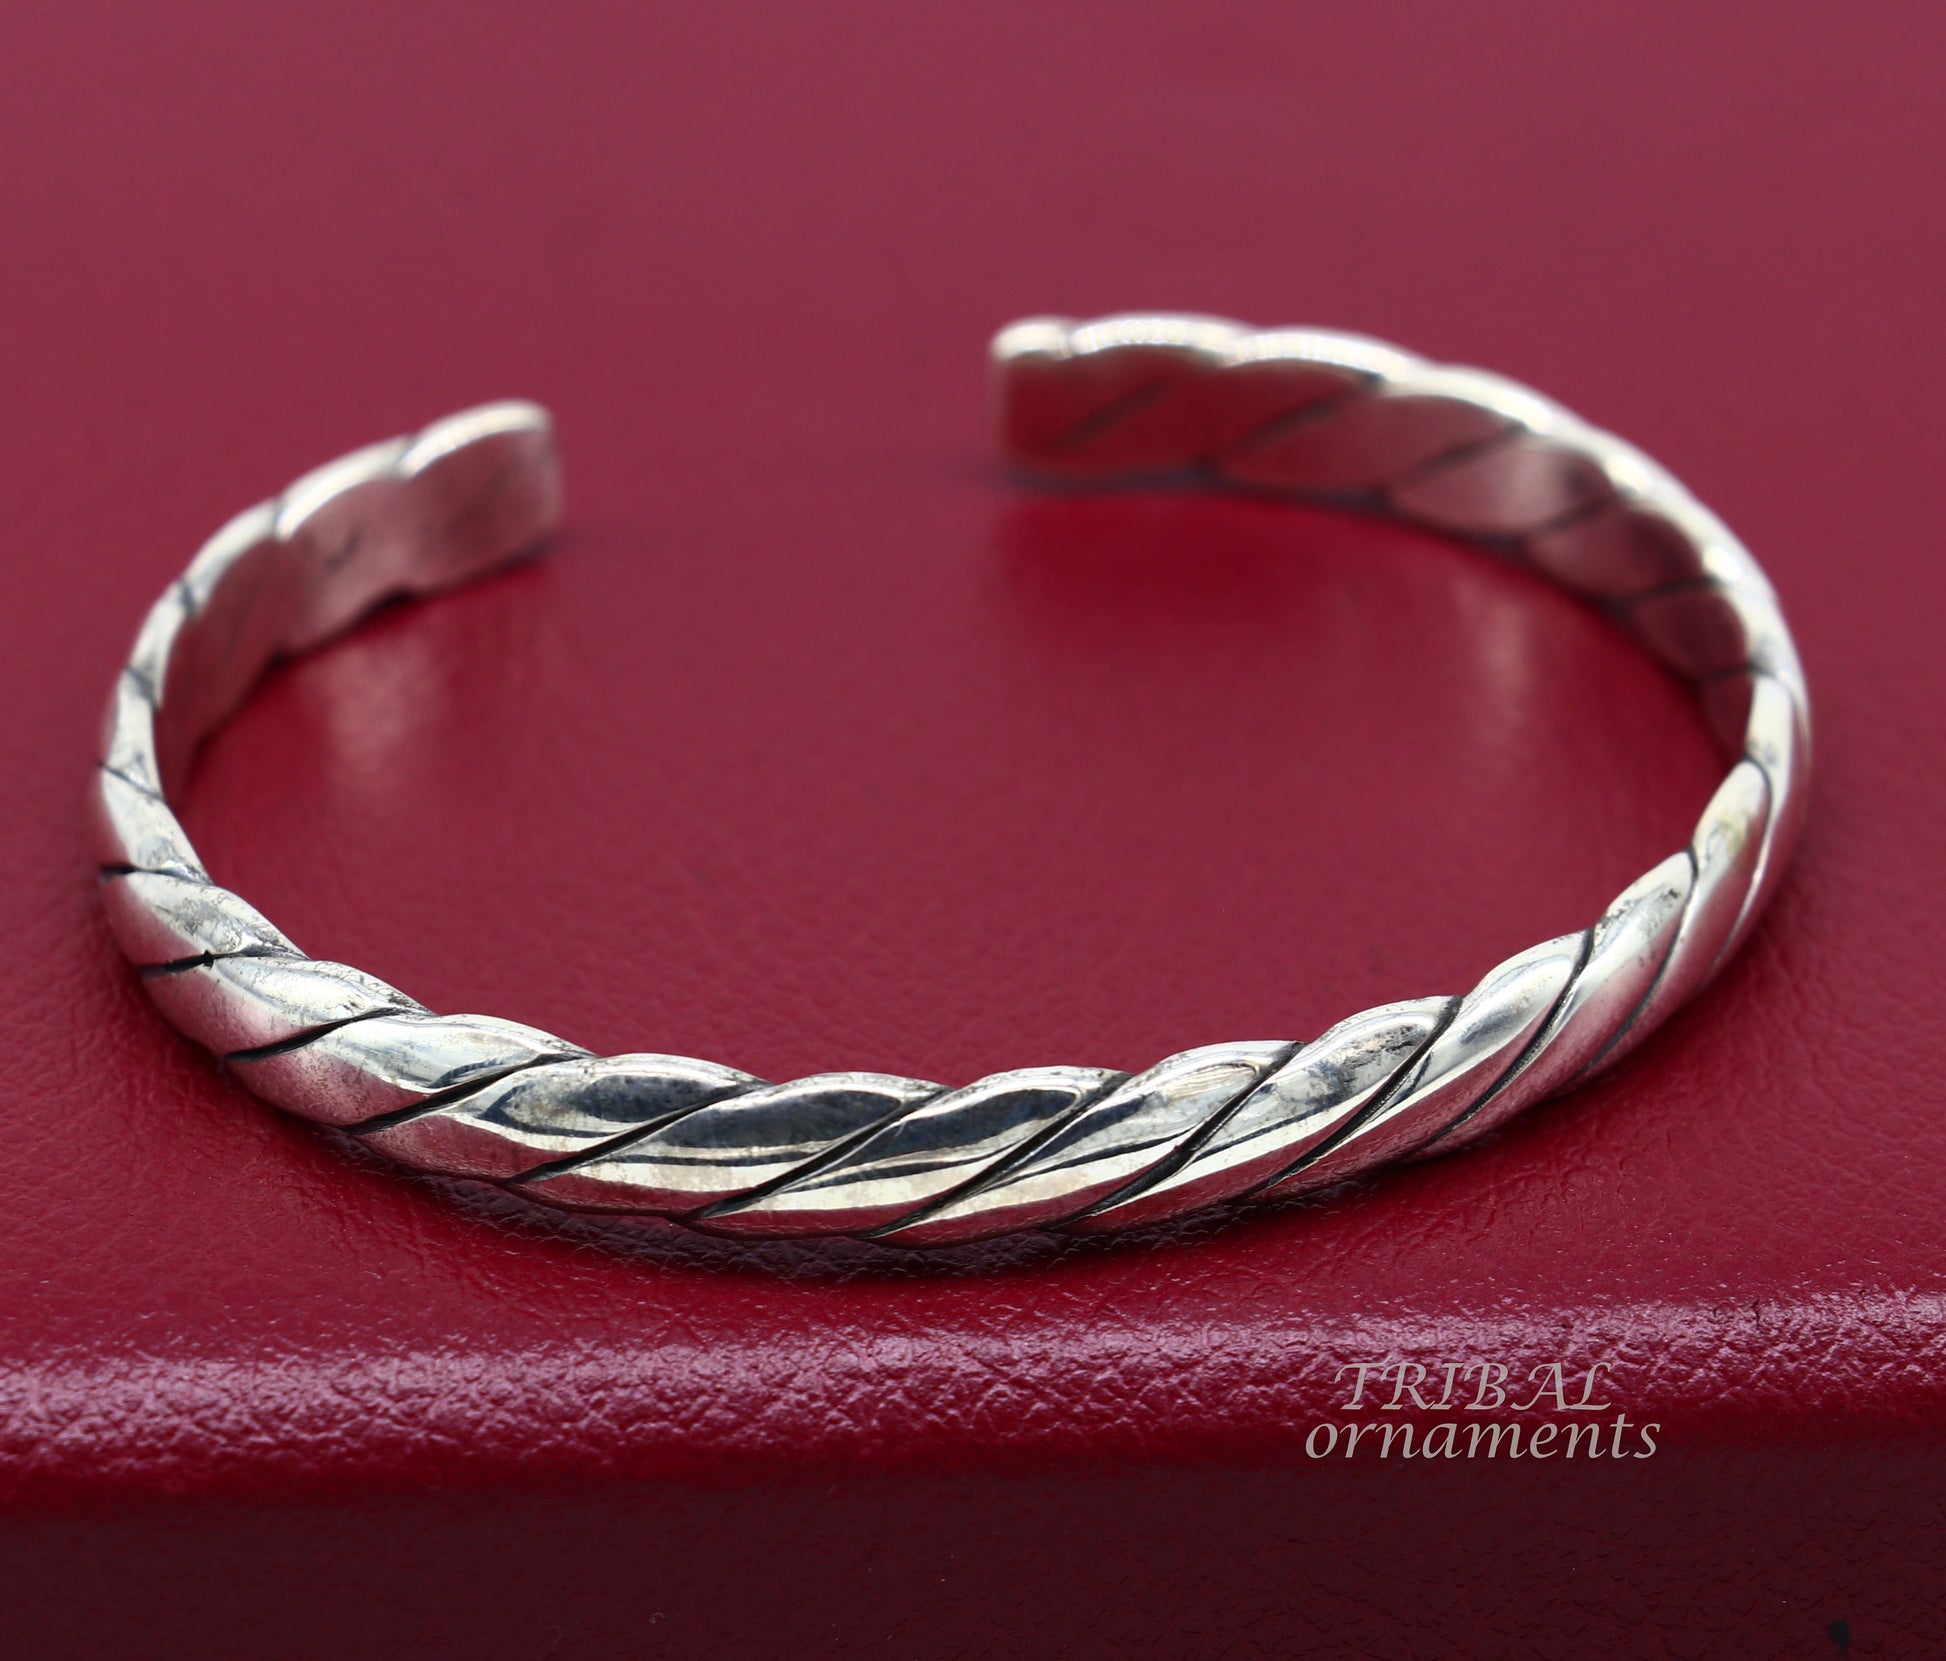 925 sterling silver handmade unique design fabulous open face adjustable bangle cuff bracelet kada, excellent gifting jewelry her cuff116 - TRIBAL ORNAMENTS